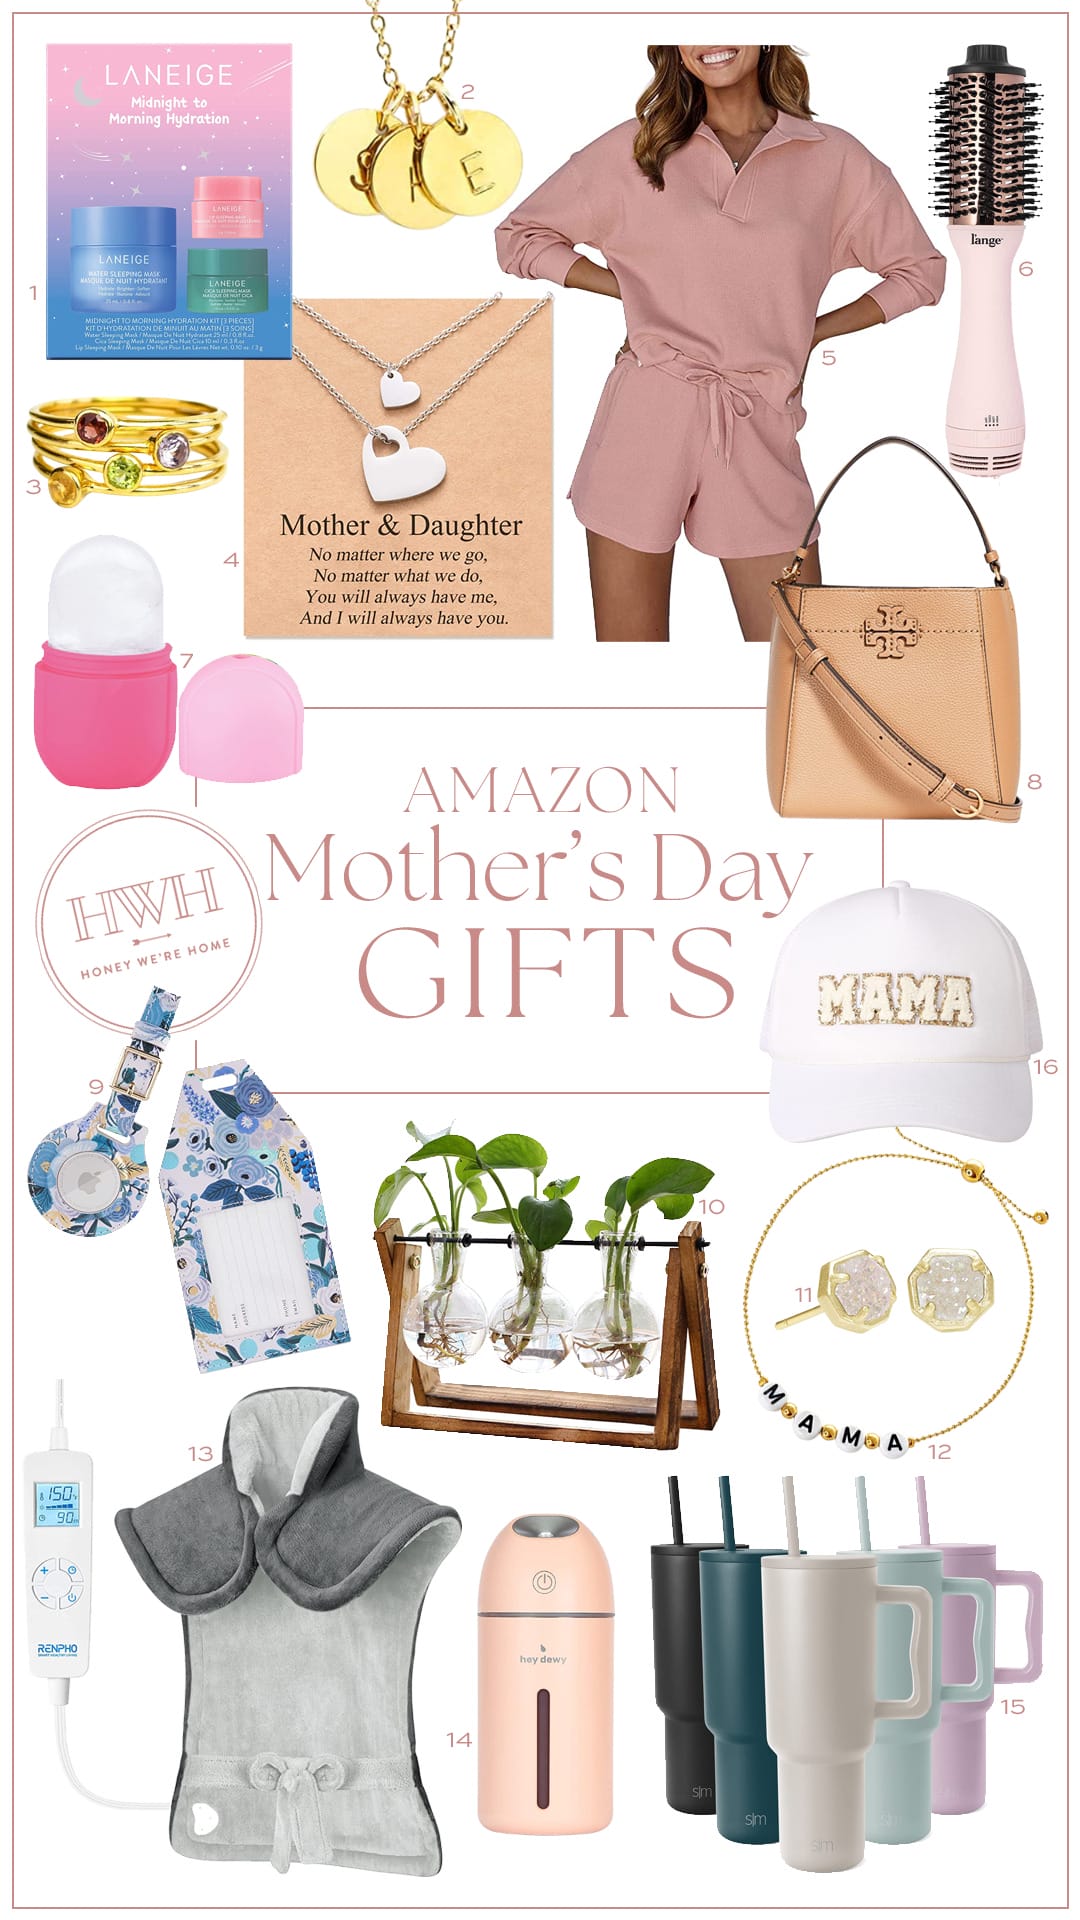 Amazon Mother's Day Gifts 